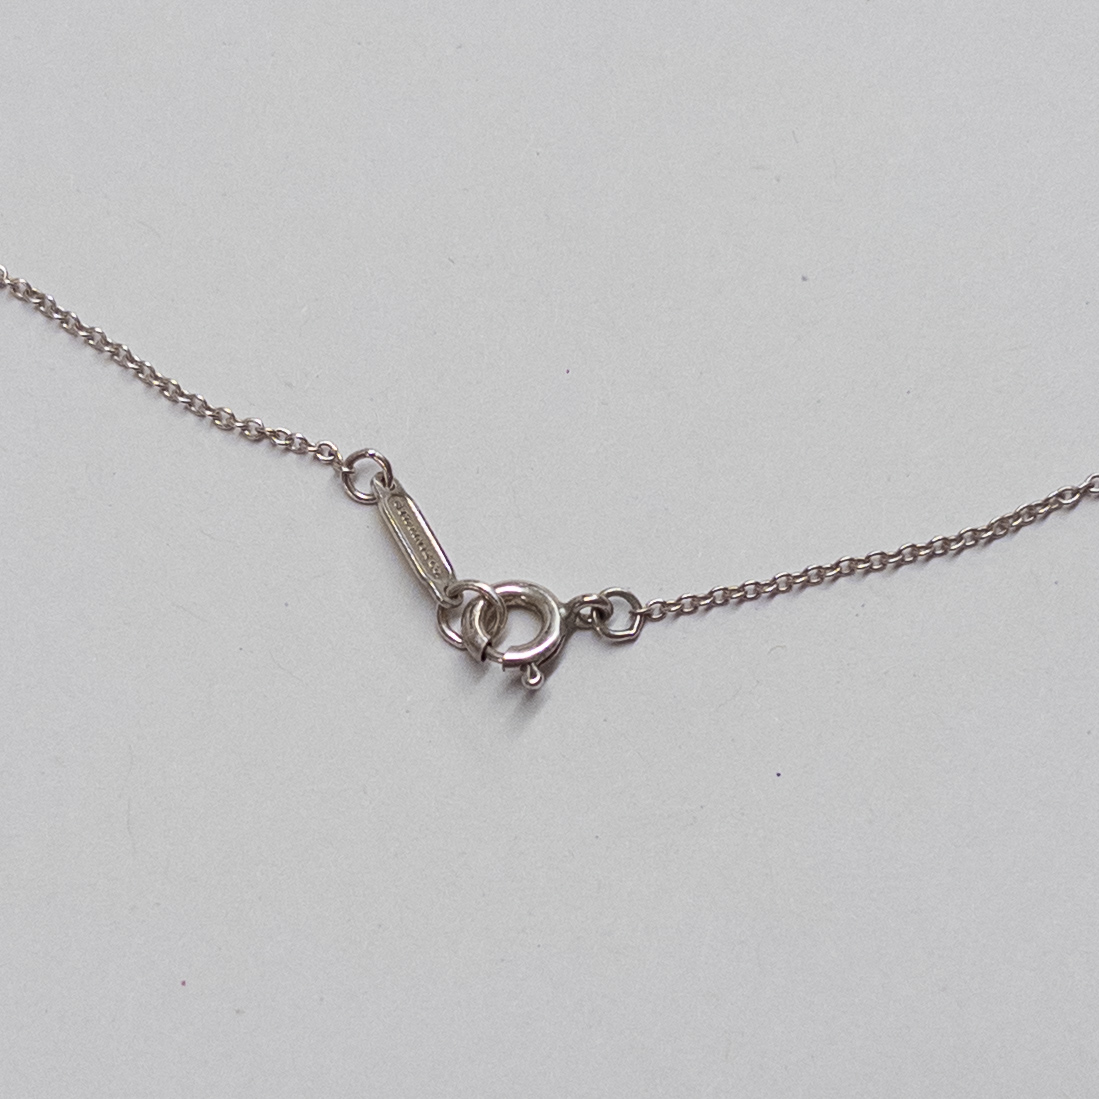 Tiffany & Co. Sterling Silver Rolo Chain Choker Necklace with Bow Pendant